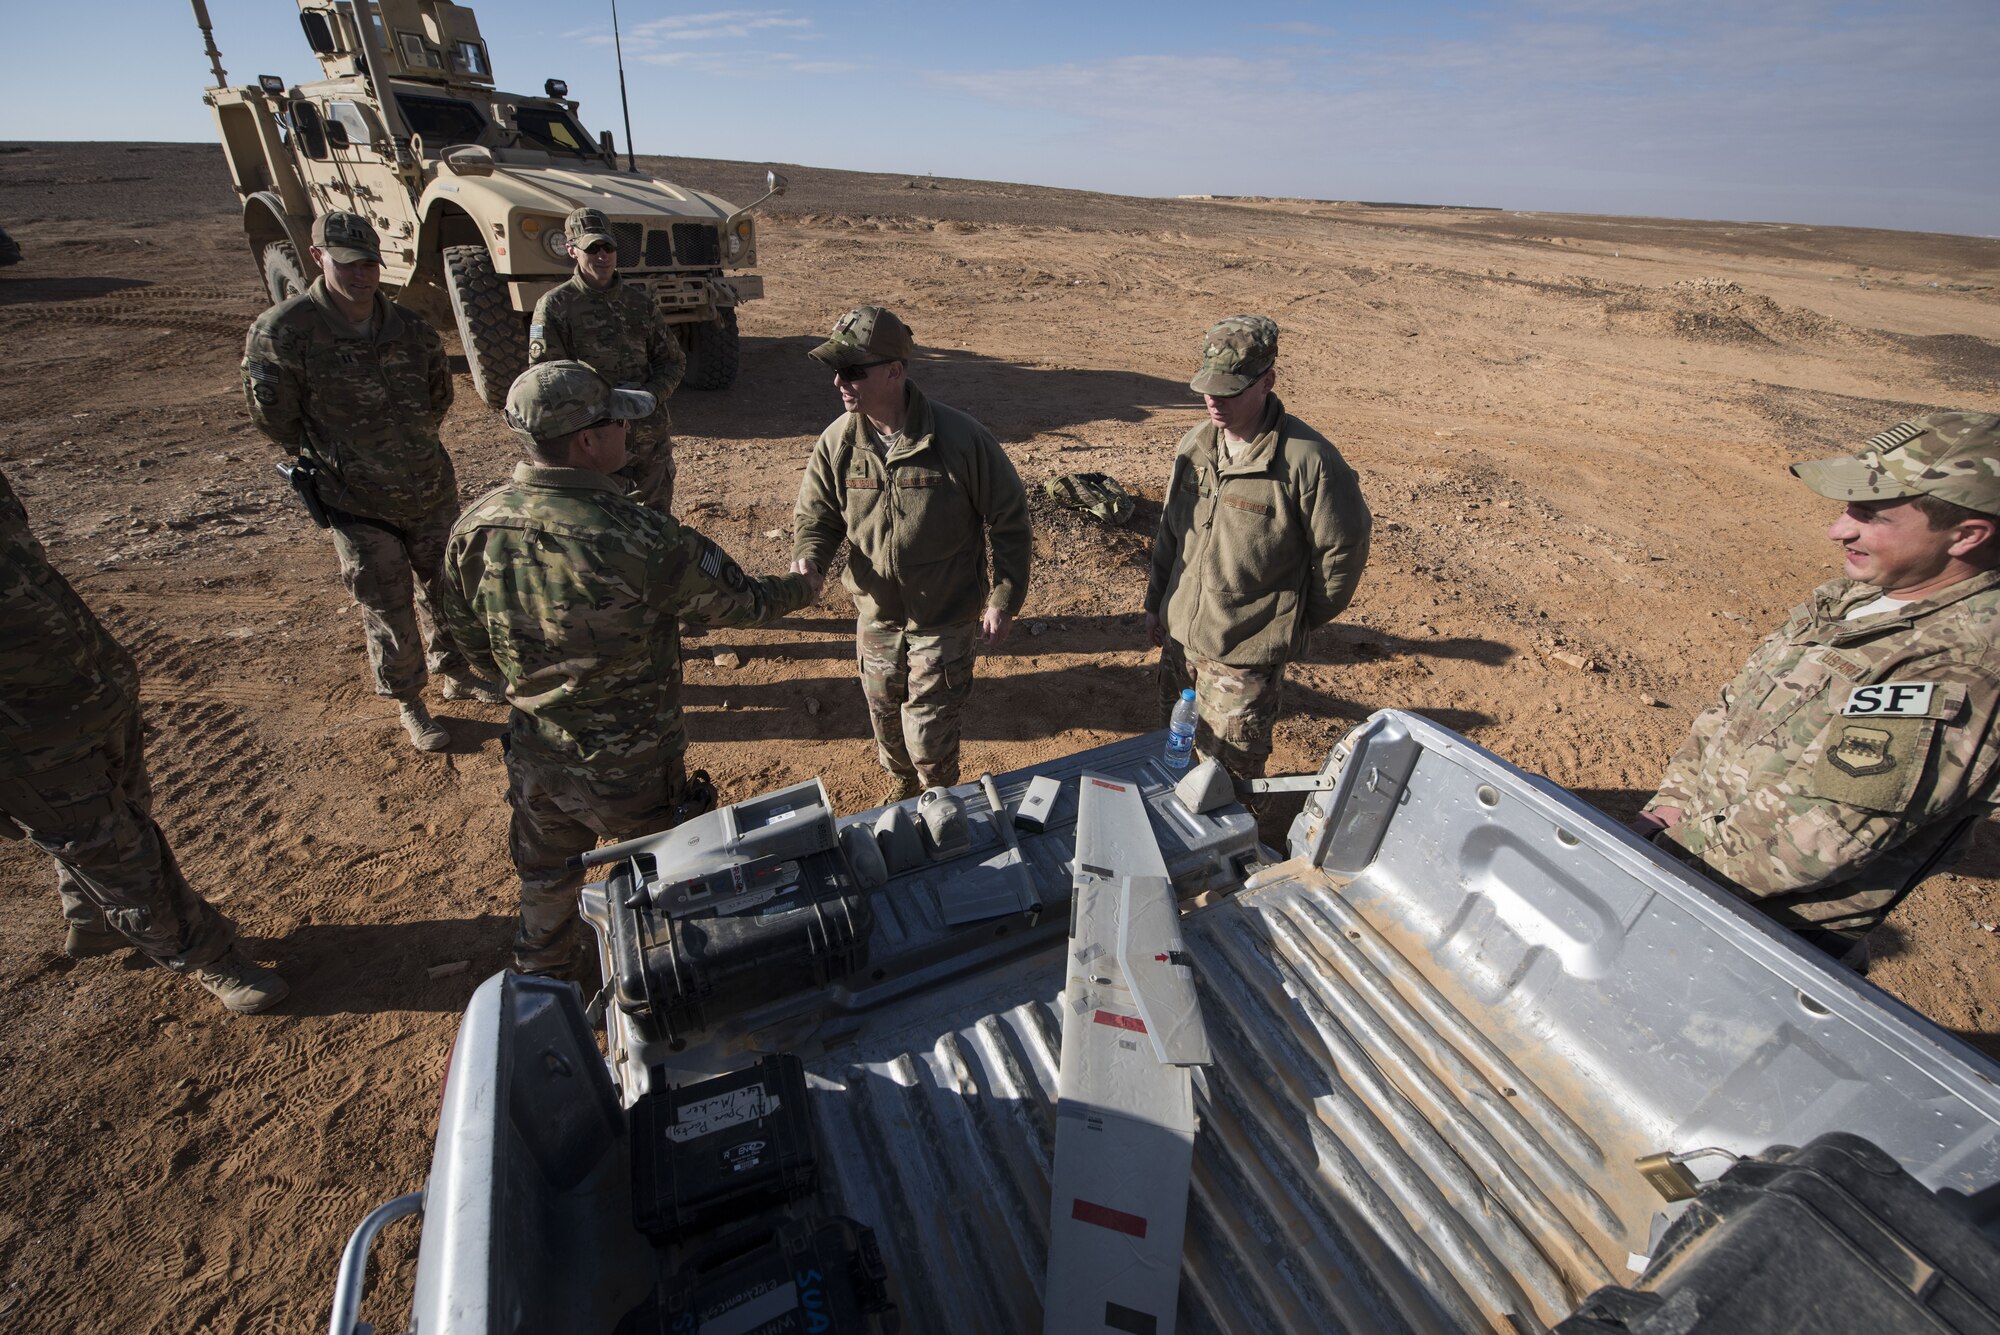 Brig. Gen. Kyle Robinson, 332d Air Expeditionary Wing commander, thanks members of the 332d Expeditionary Security Forces Squadron following a successful demonstration of the Raven B Digital Data Link drone Jan. 24, 2018 in Southwest Asia. Using the Raven B to monitor activity on the installation perimeter saves man hours, conserves fuel, and provides the ability to quickly respond to the unmanned aerial systems threat. (U.S. Air Force photo by Staff Sgt. Joshua Kleinholz)